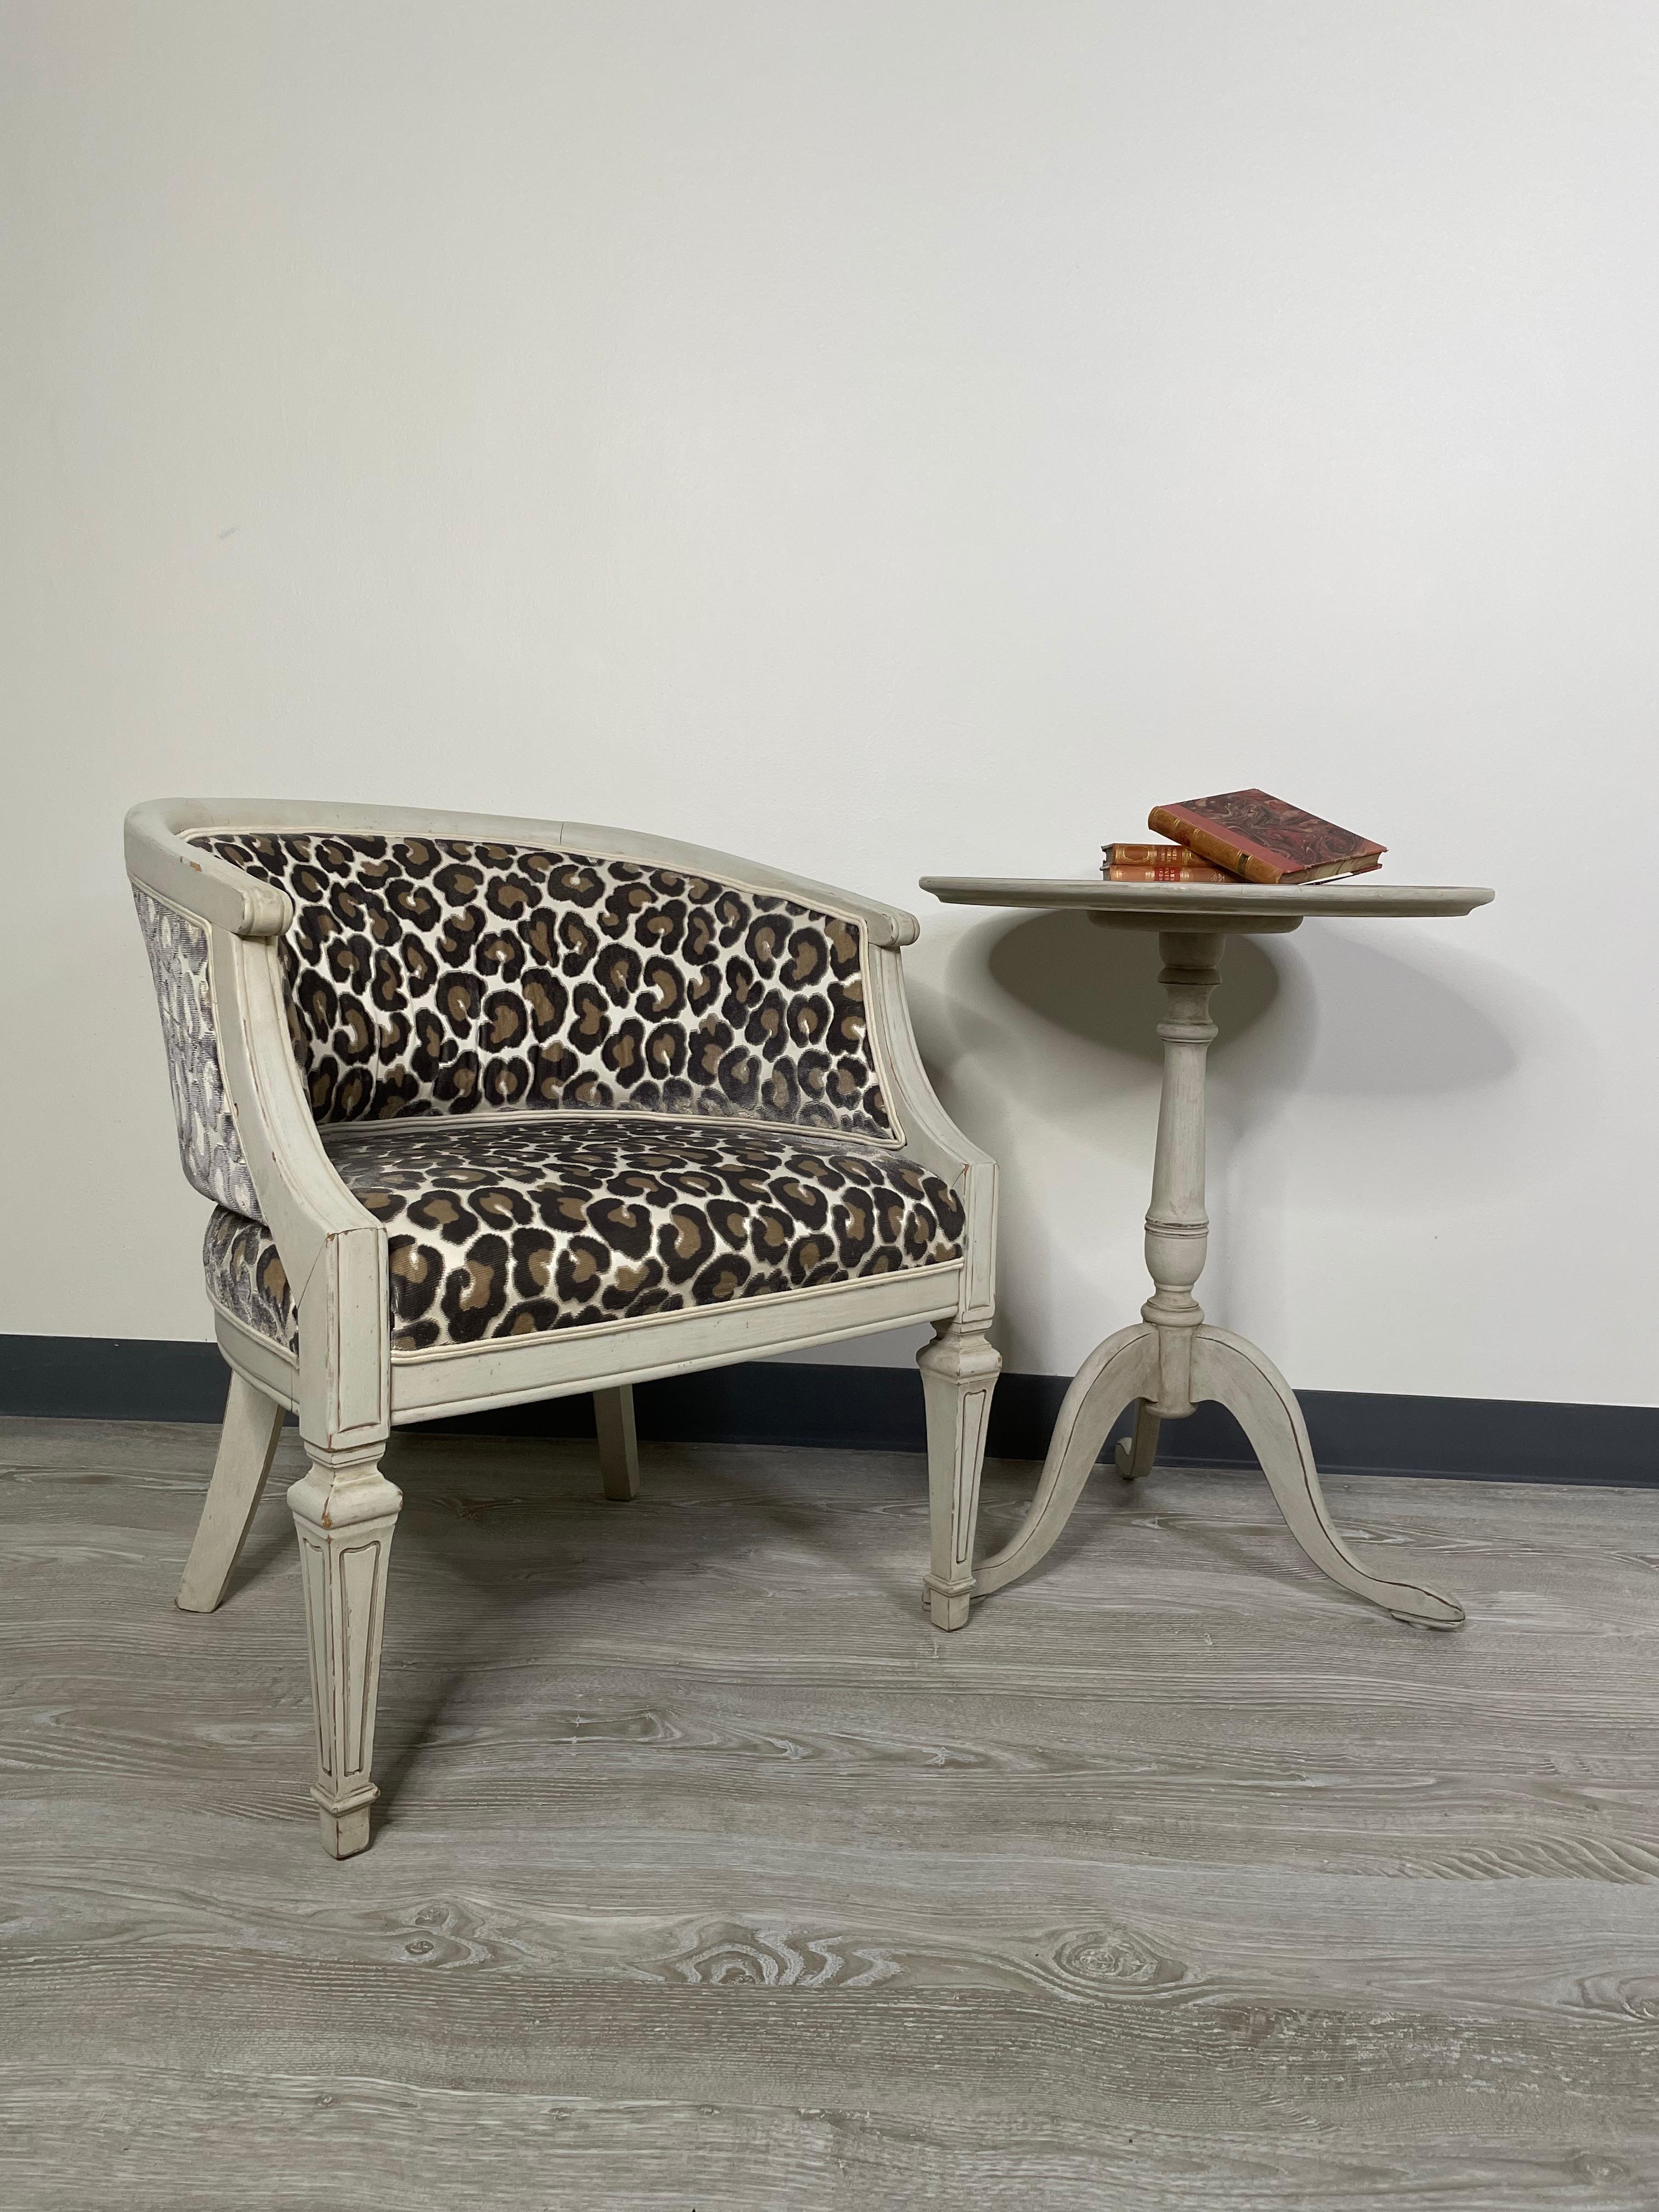 A stunning vintage Swedish barrel back chair freshly dressed in a beautiful velvet animal print from Kravet Couture. A true conversation piece that is at home in the library, lounge and sitting room.